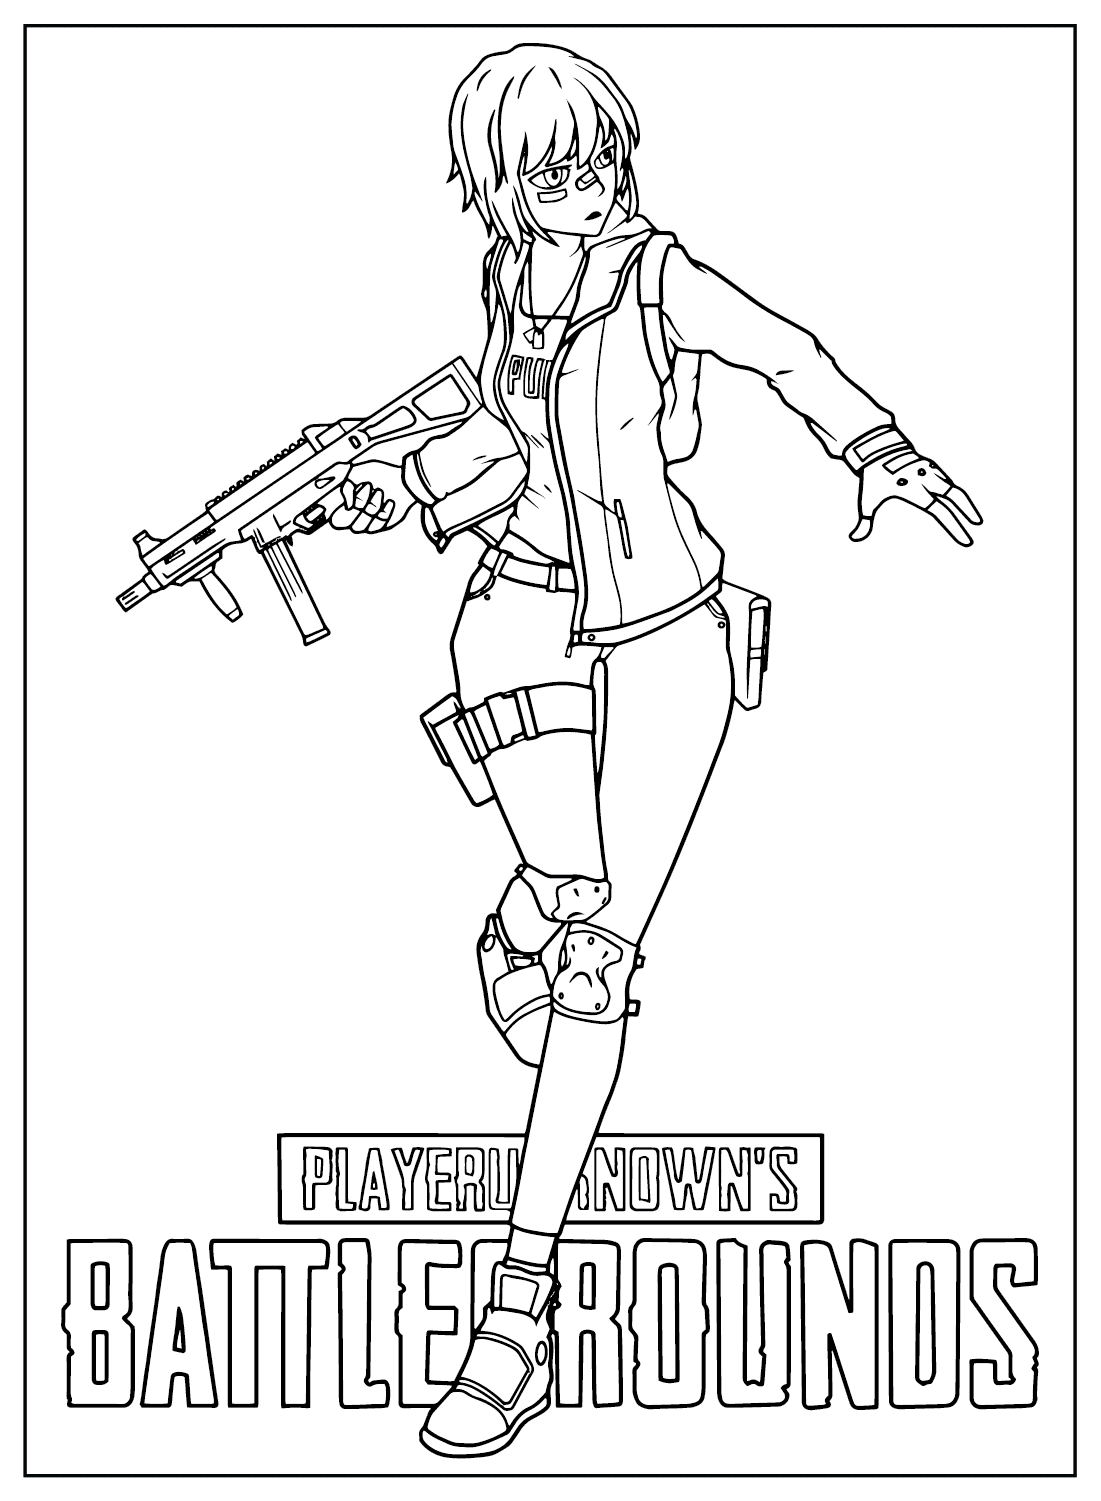 Battle Royale Game Pubg Coloring Page from PUBG